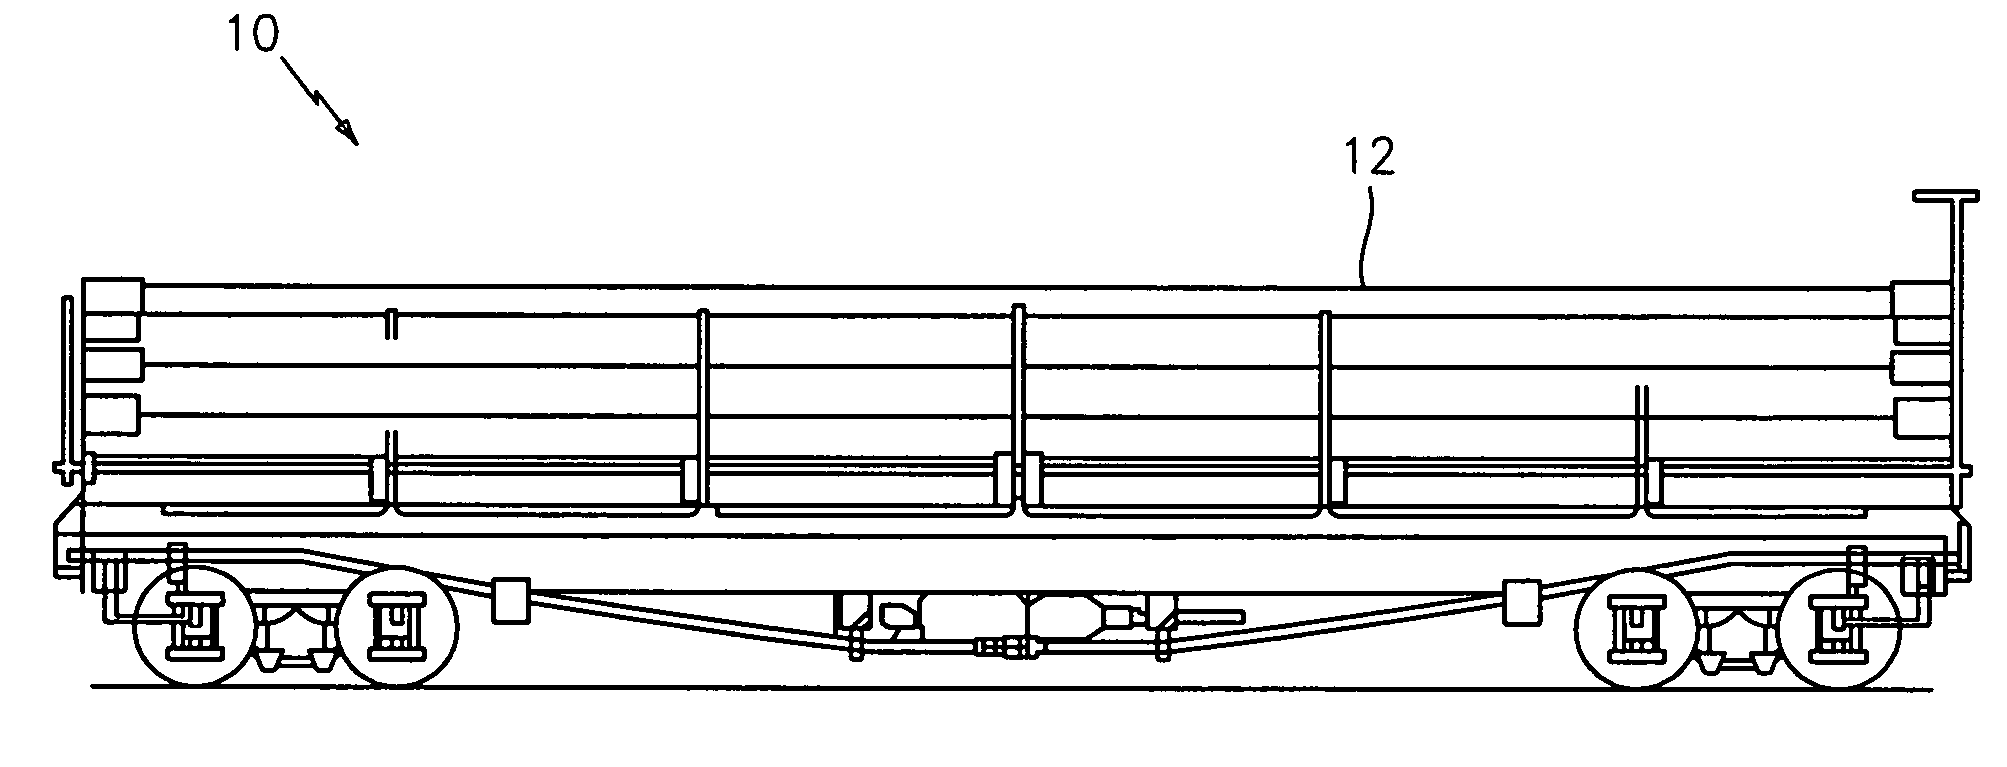 Open-top rail car covers and open-top rail cars employing the same